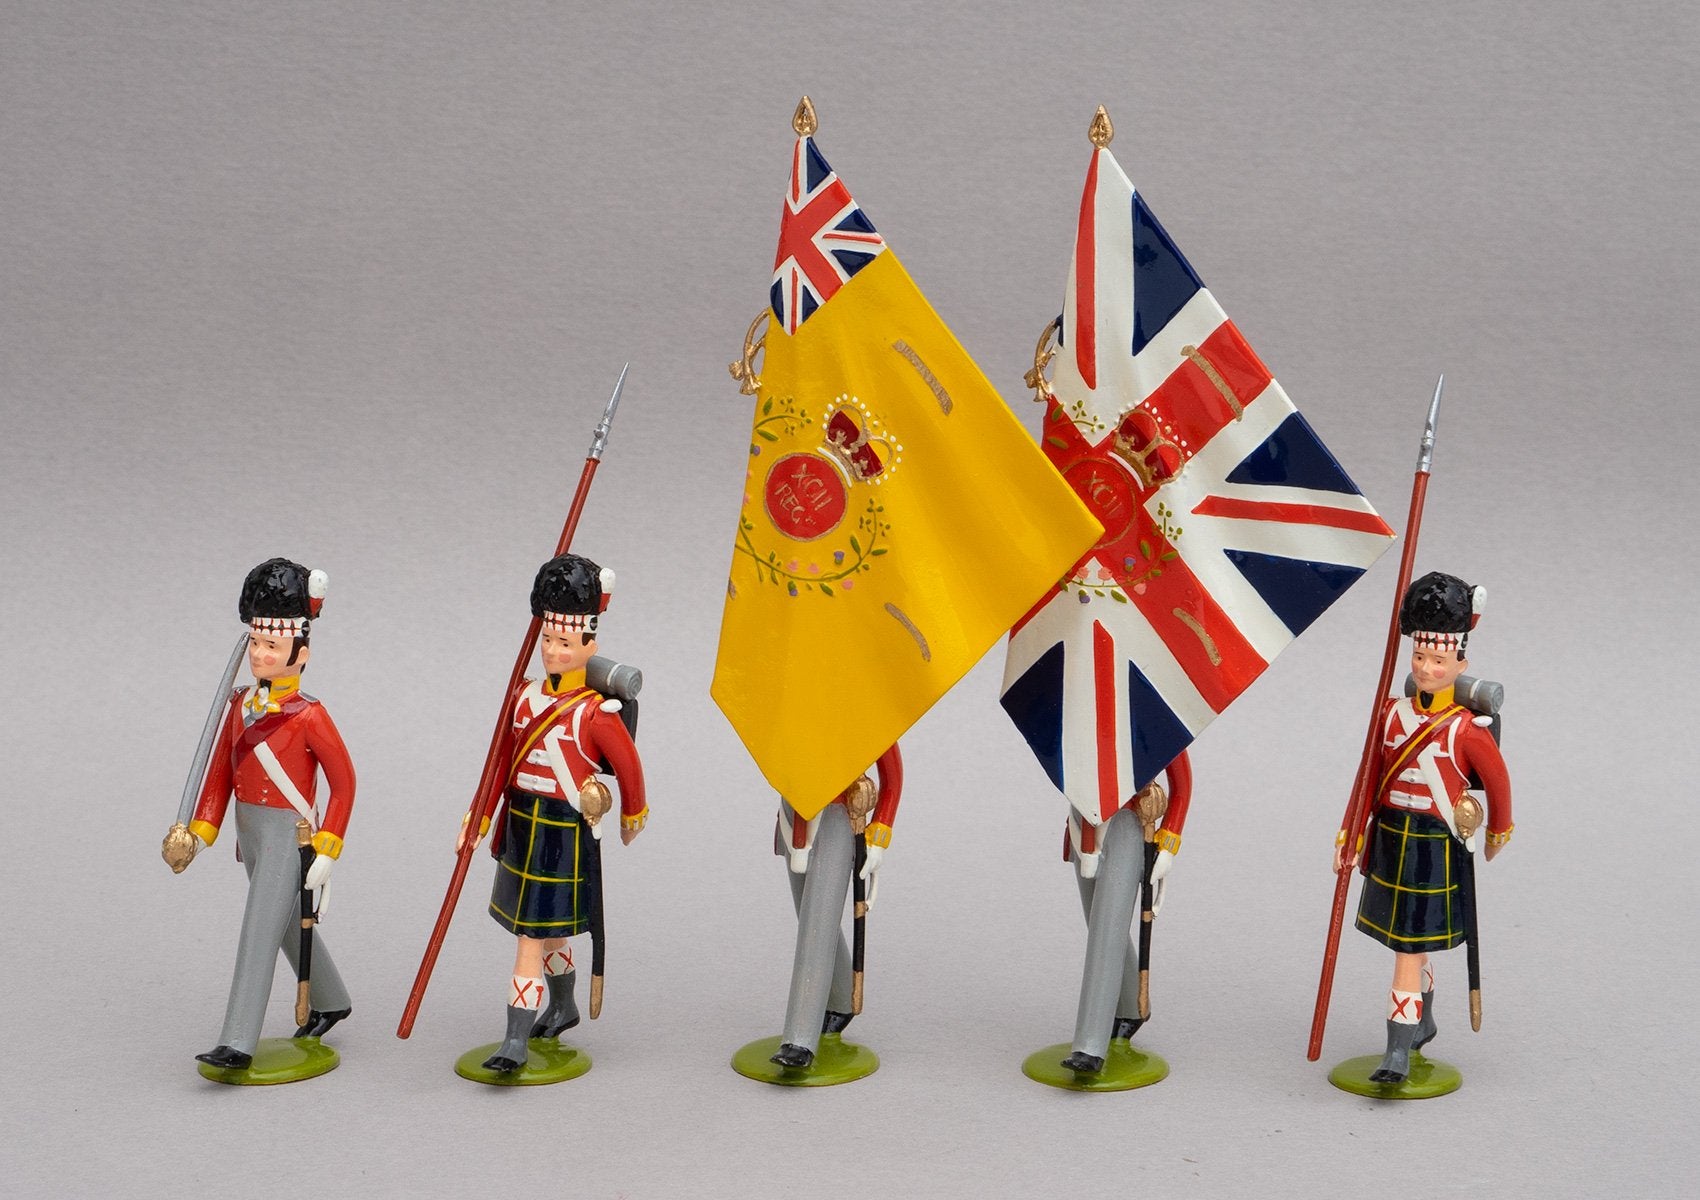 Set 122 Colour Party Gordon Highlanders, Waterloo 1815 | British Infantry | Napoleonic Wars | Colour Party; All wear the Highlander feather bonnet and Gordon tartan kilts. This set comprises a two ensigns carrying the colours, two guards, and one officer | Waterloo | © Imperial Productions | Sculpt by David Cowe